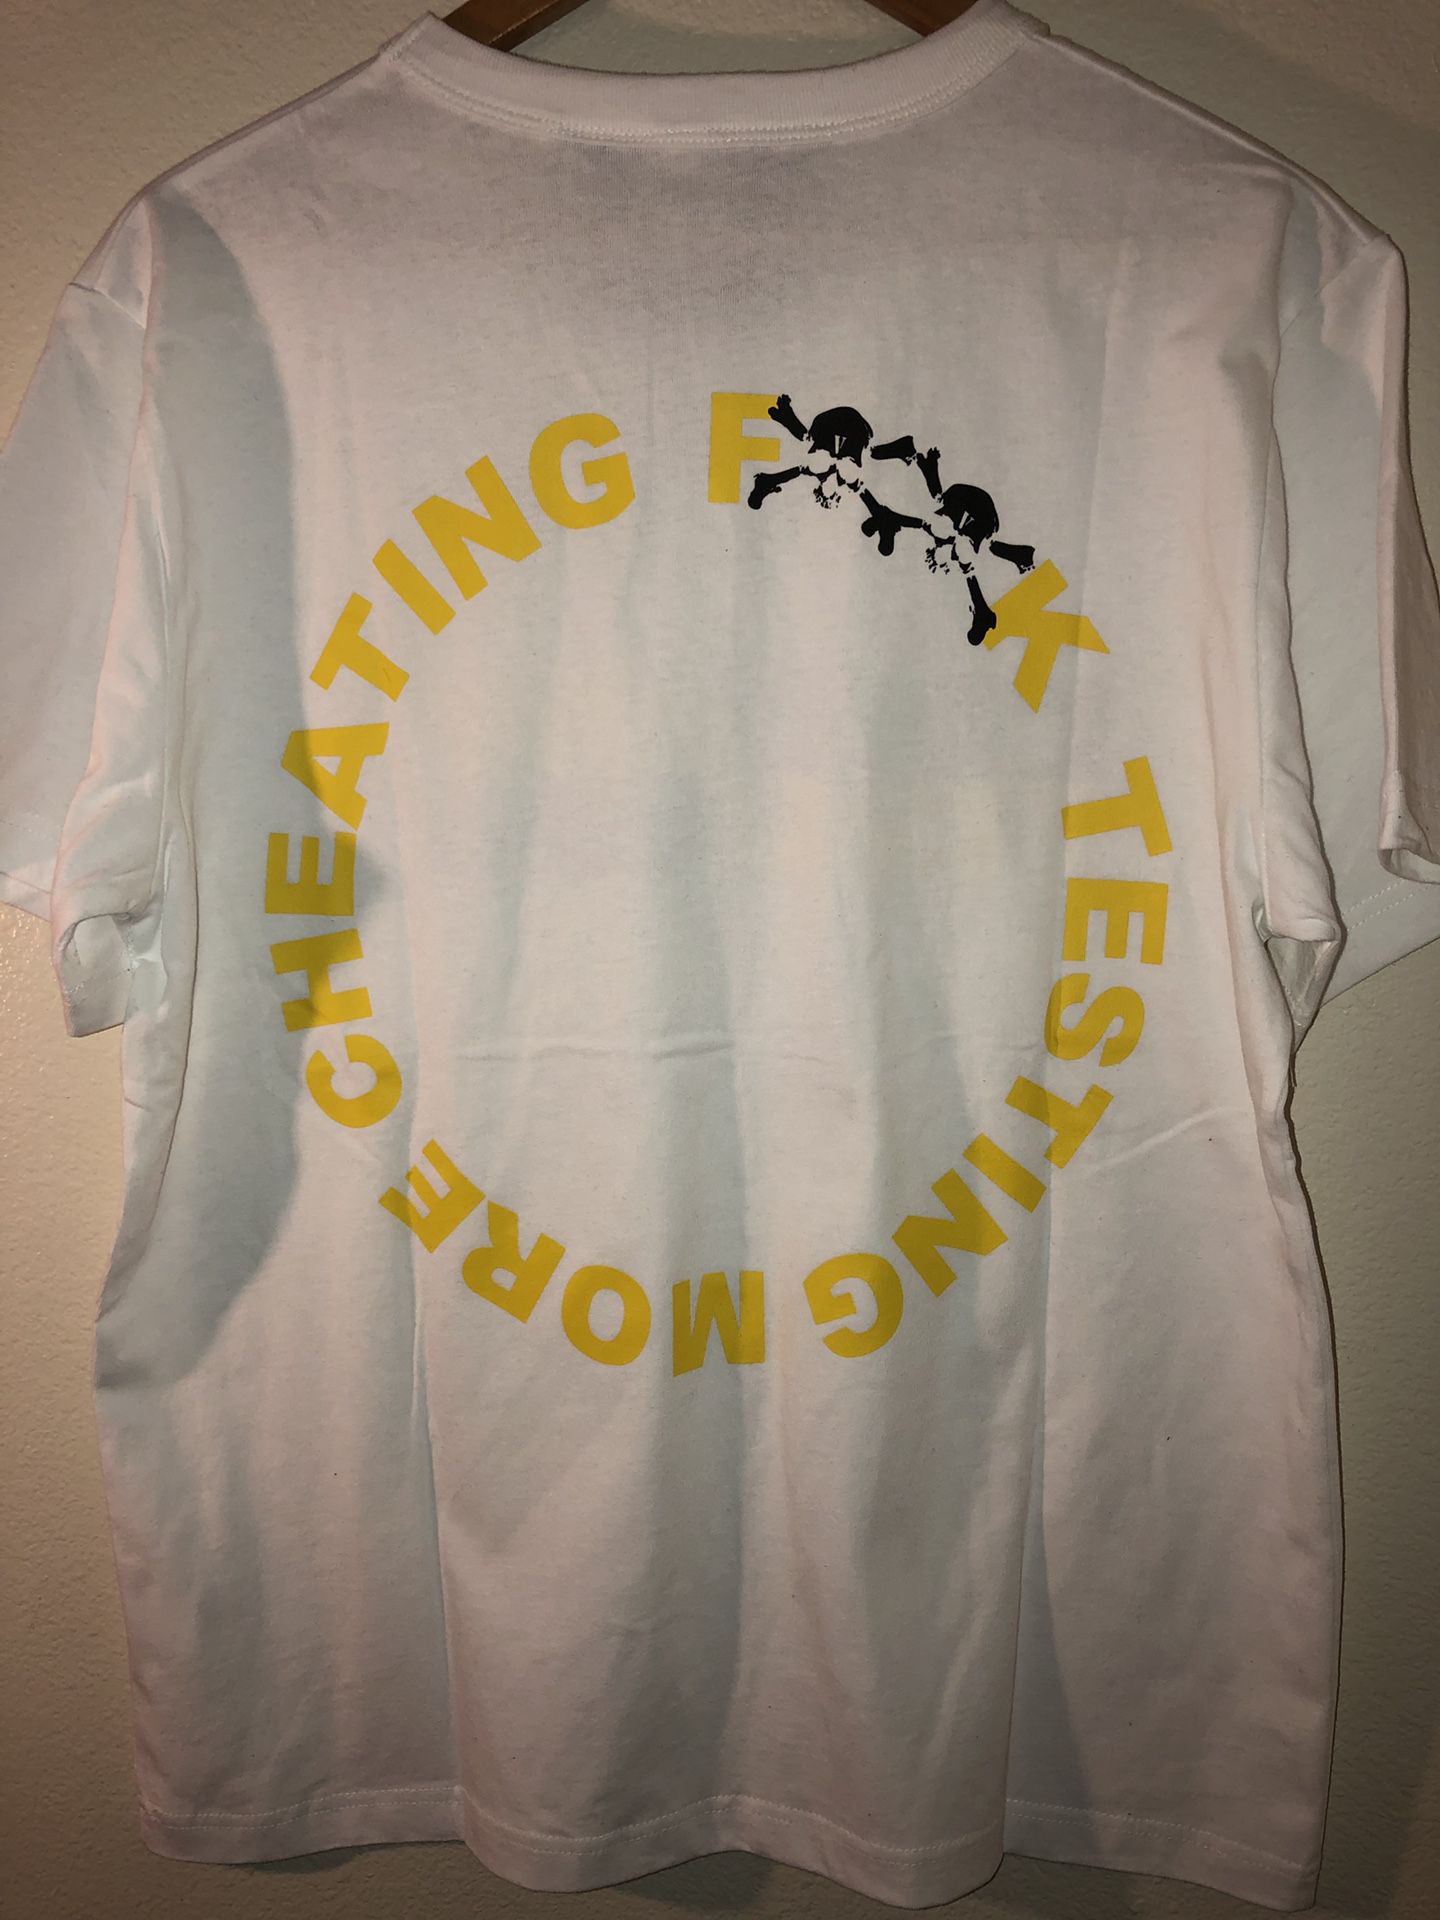 Human Testing A$AP Rocky T-Shirt, Size XL for Sale in Las Vegas, NV -  OfferUp